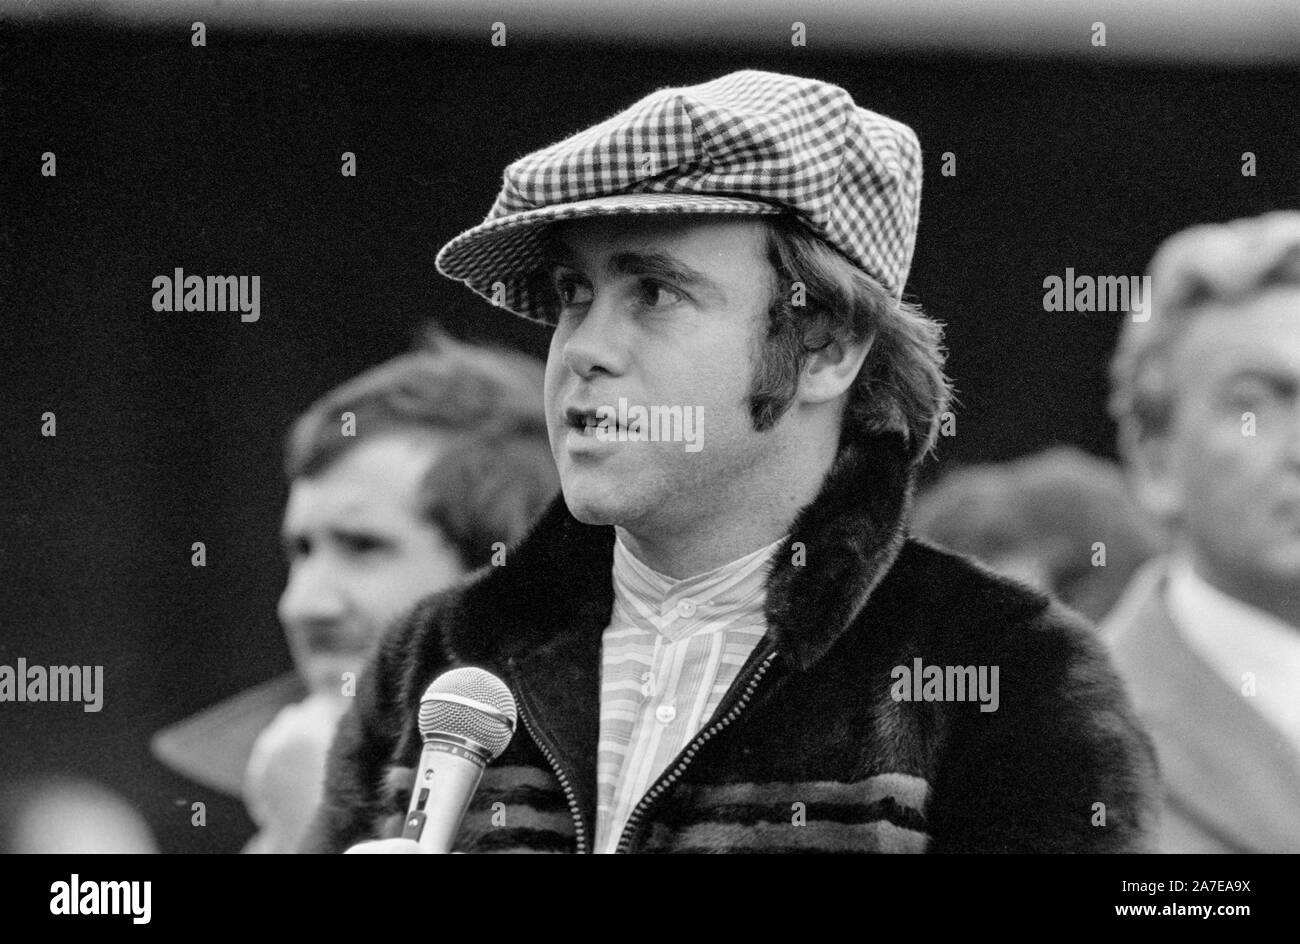 English Pop Star, pianist, and song writer, Elton John. Photograph taken during the 1980s. Stock Photo